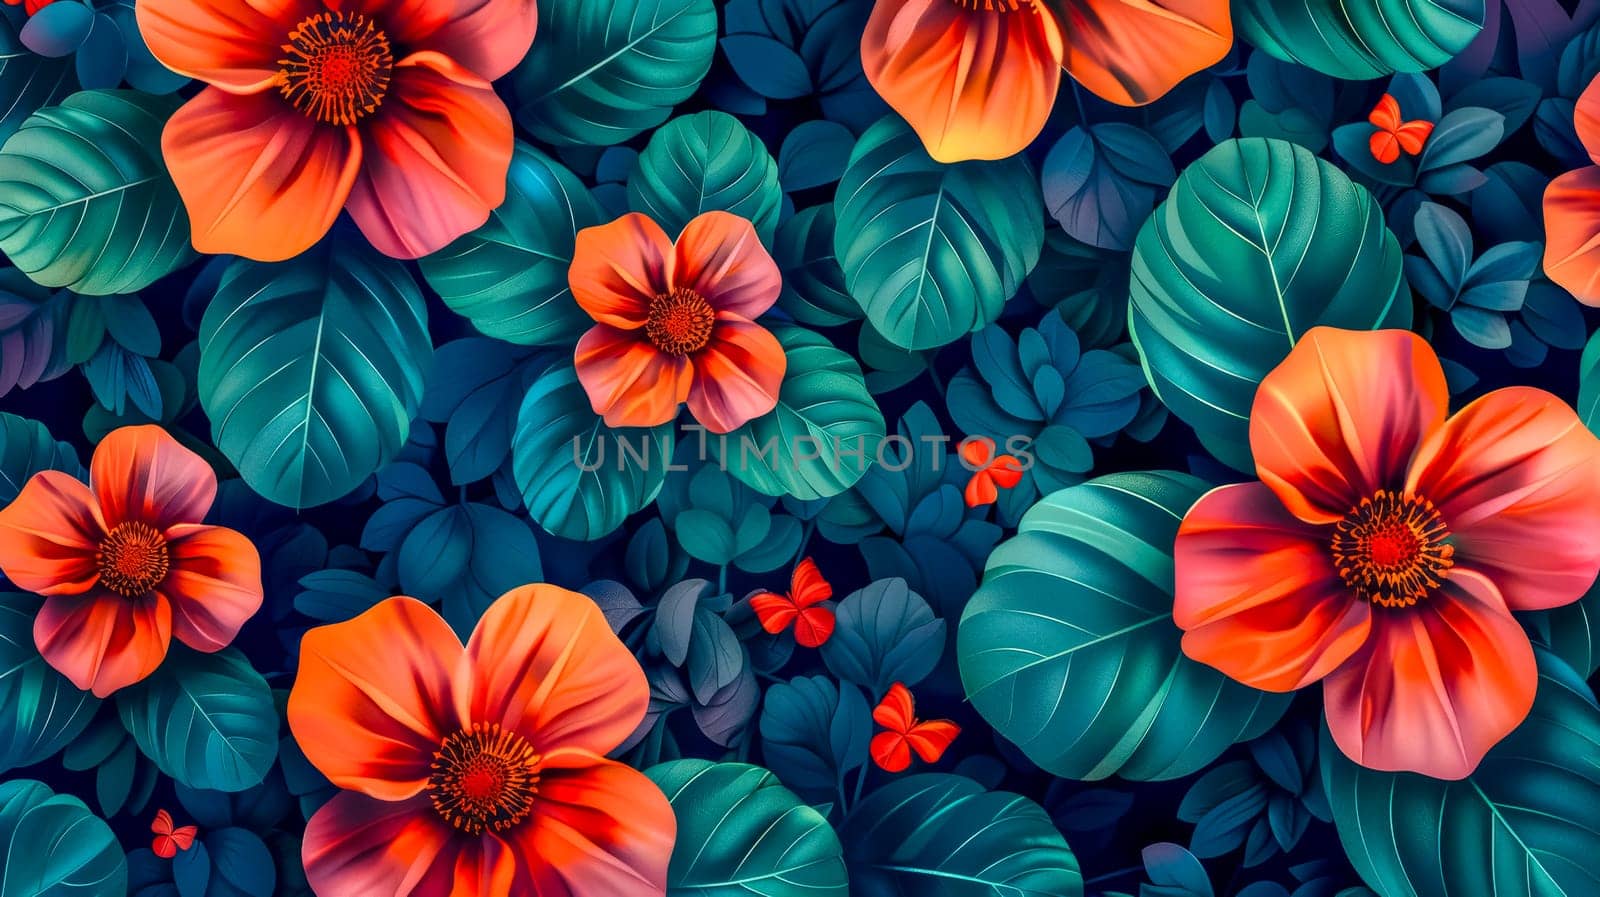 Vibrant floral pattern with tropical leaves by Edophoto